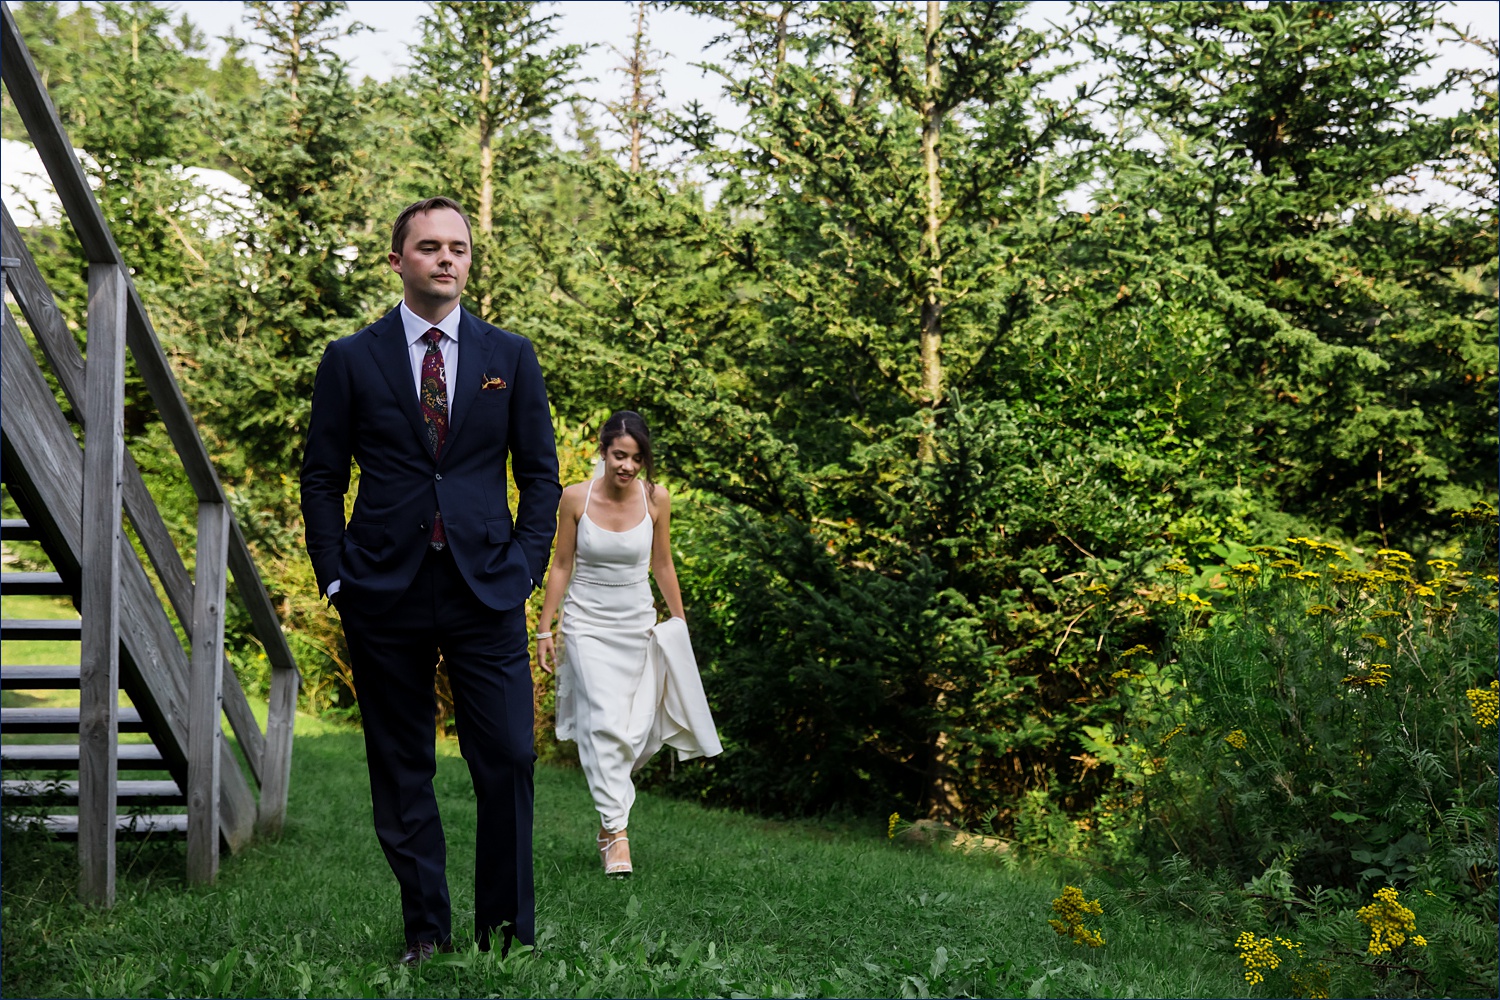 The first look with the bride and groom in the woods